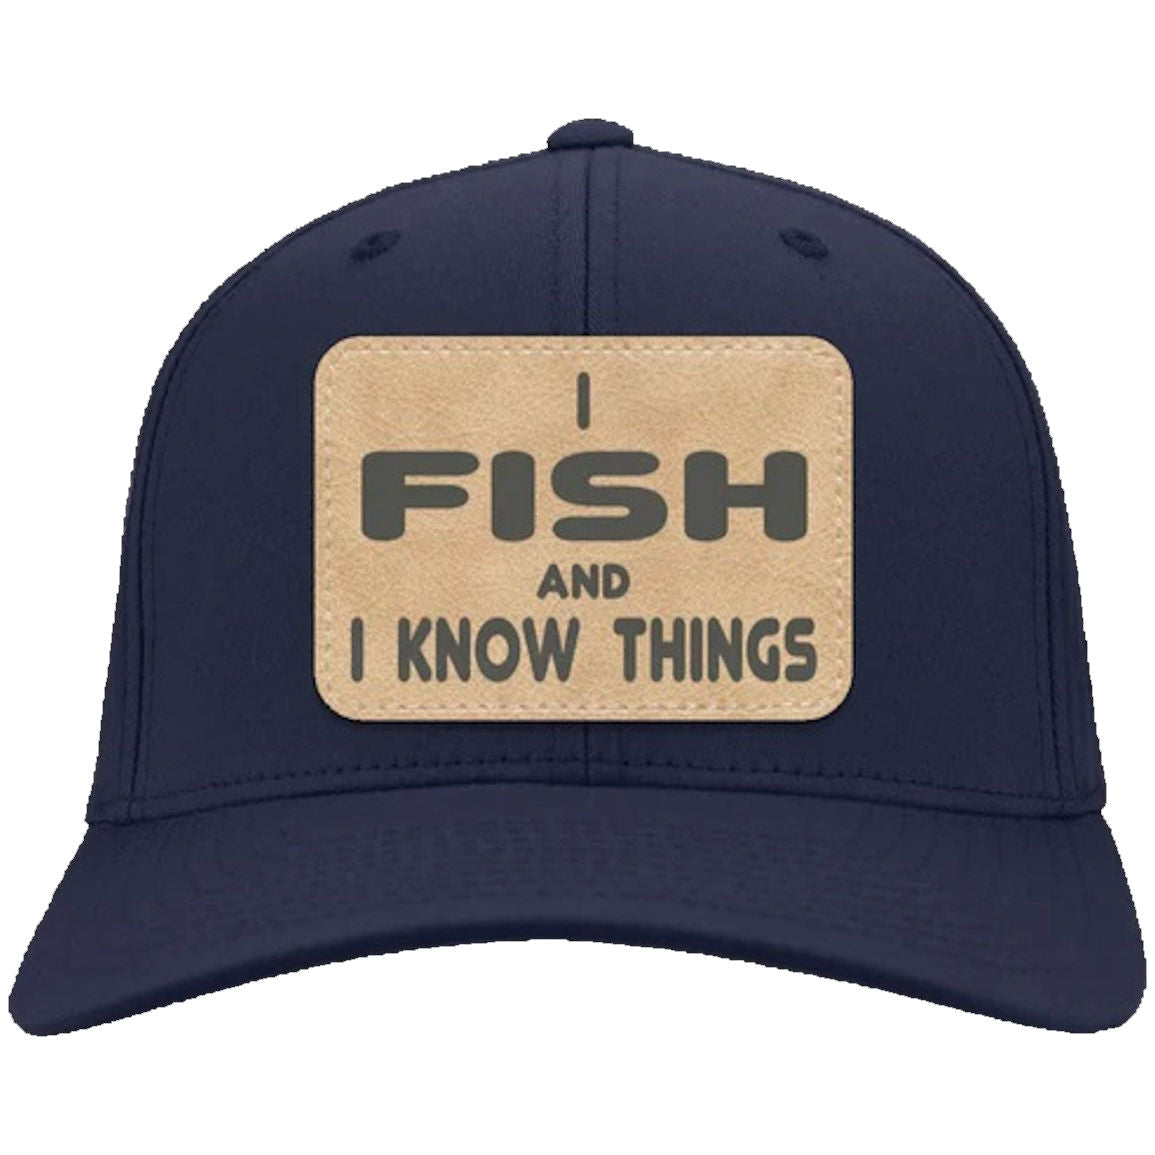 I Fish and Know Things Twill Cap navy